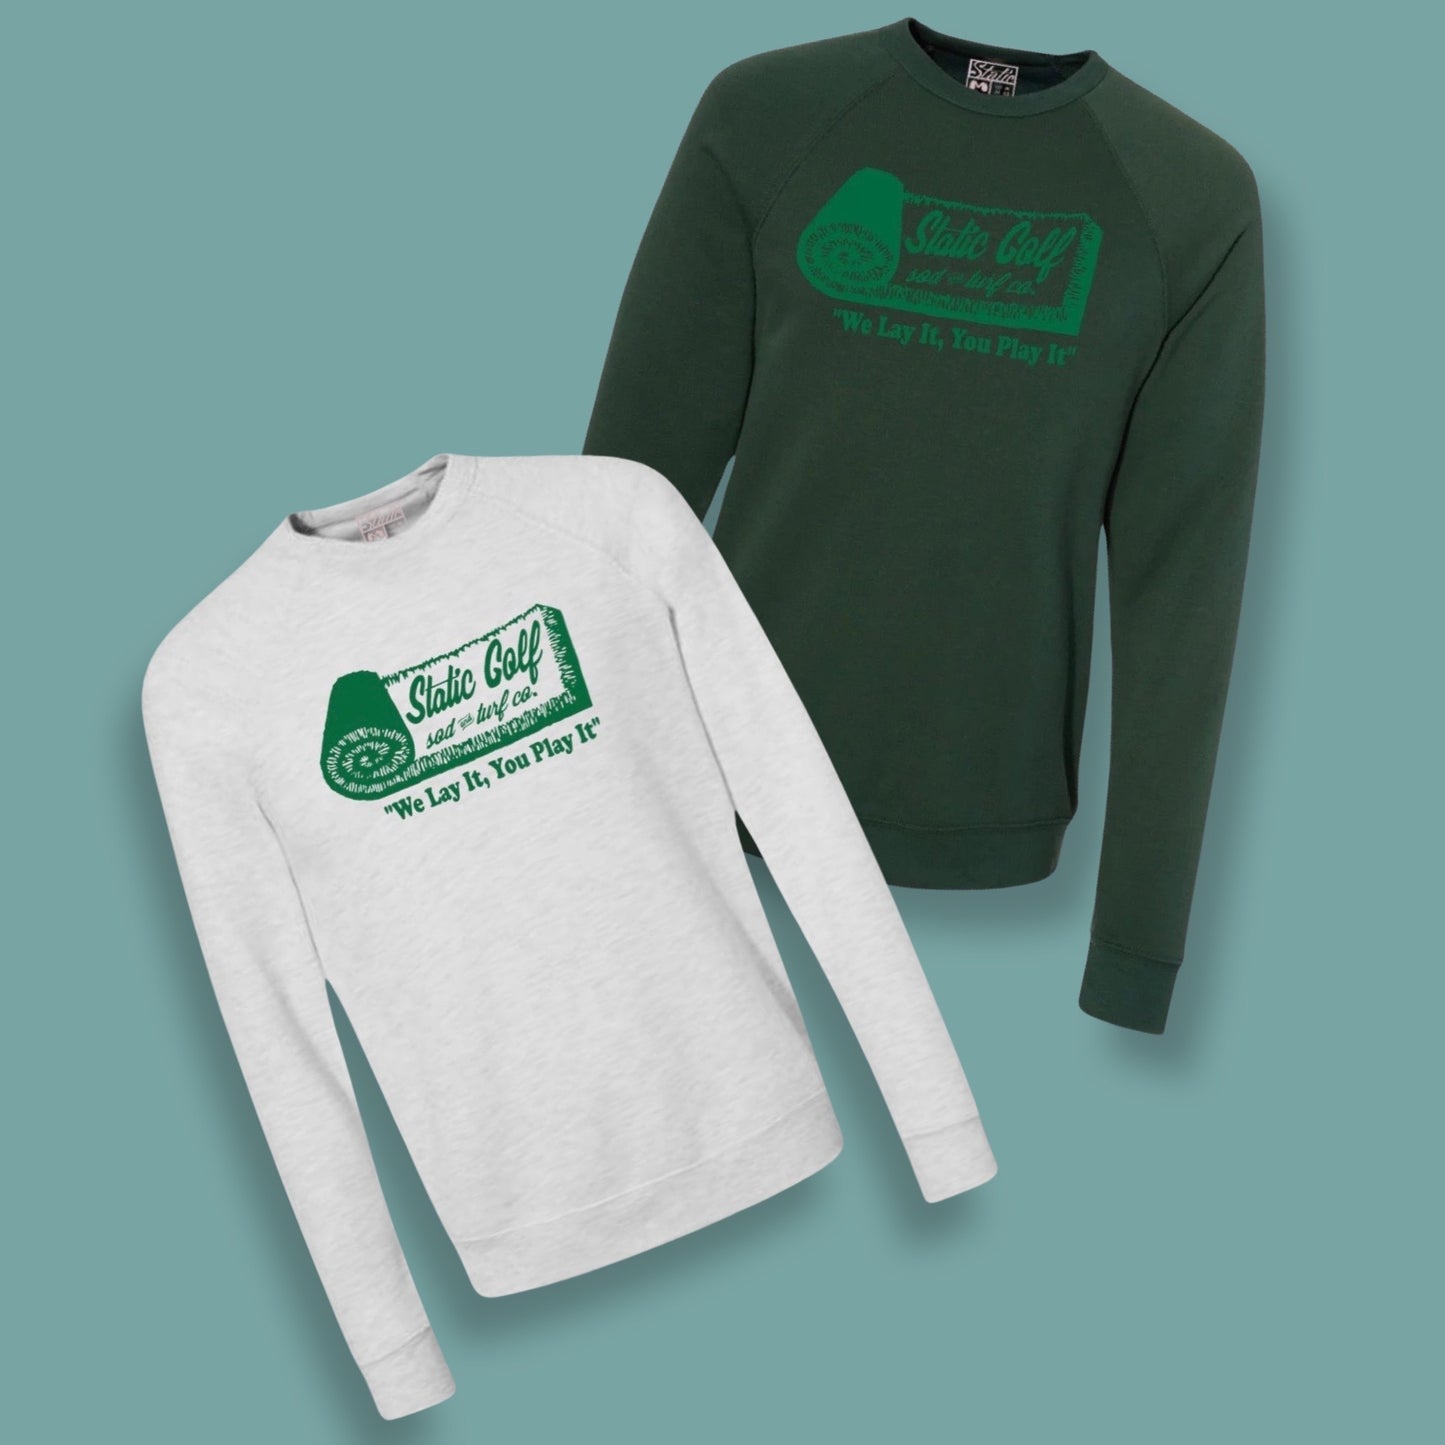 SOD AND TURF - CREW NECK